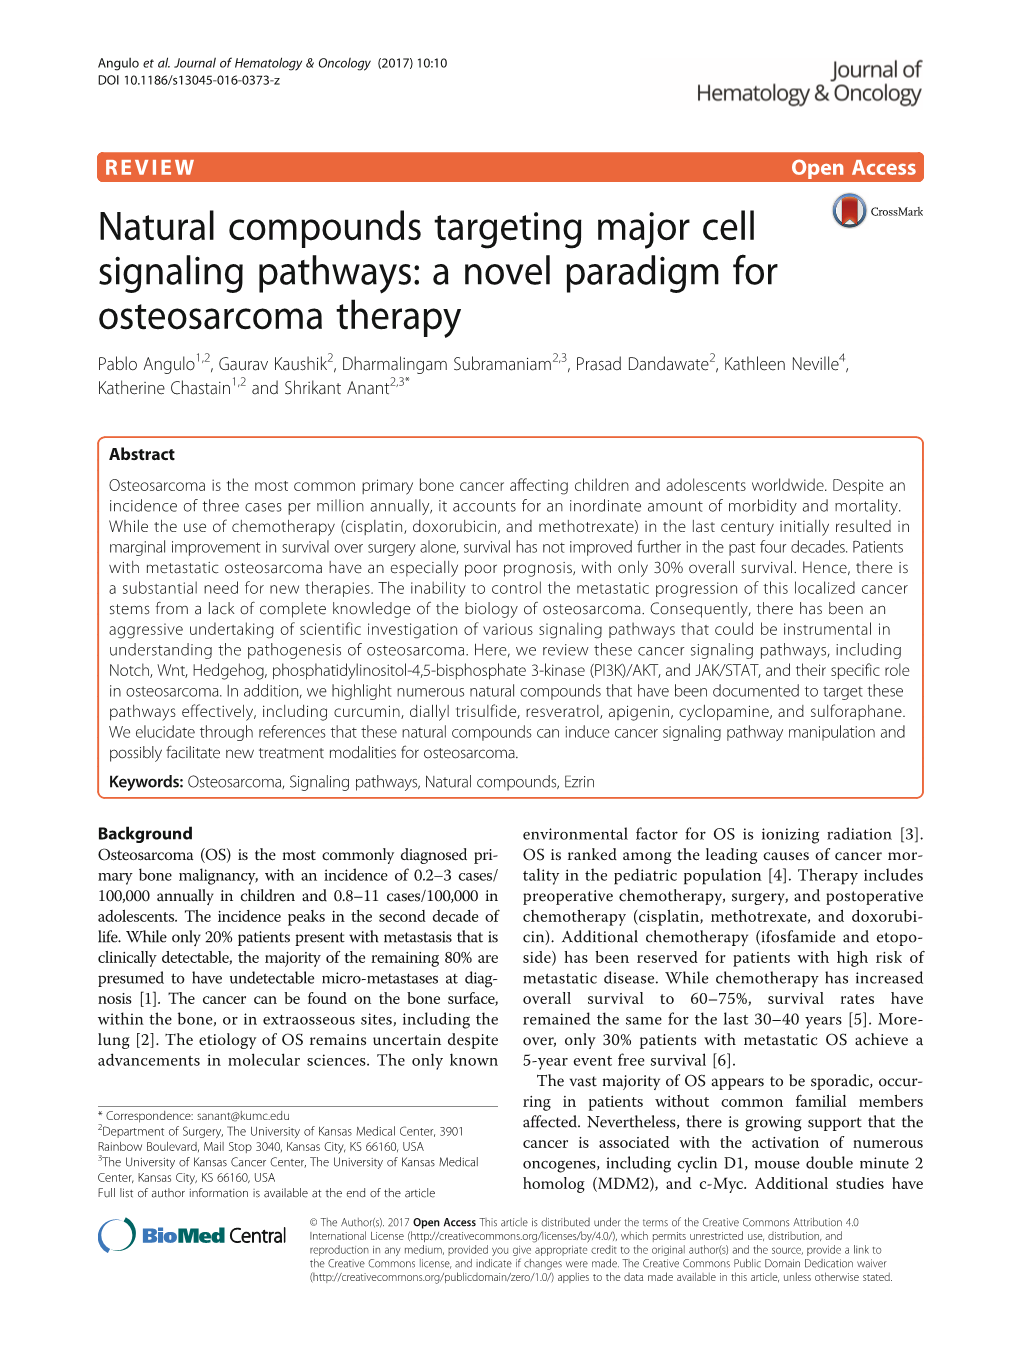 Natural Compounds Targeting Major Cell Signaling Pathways